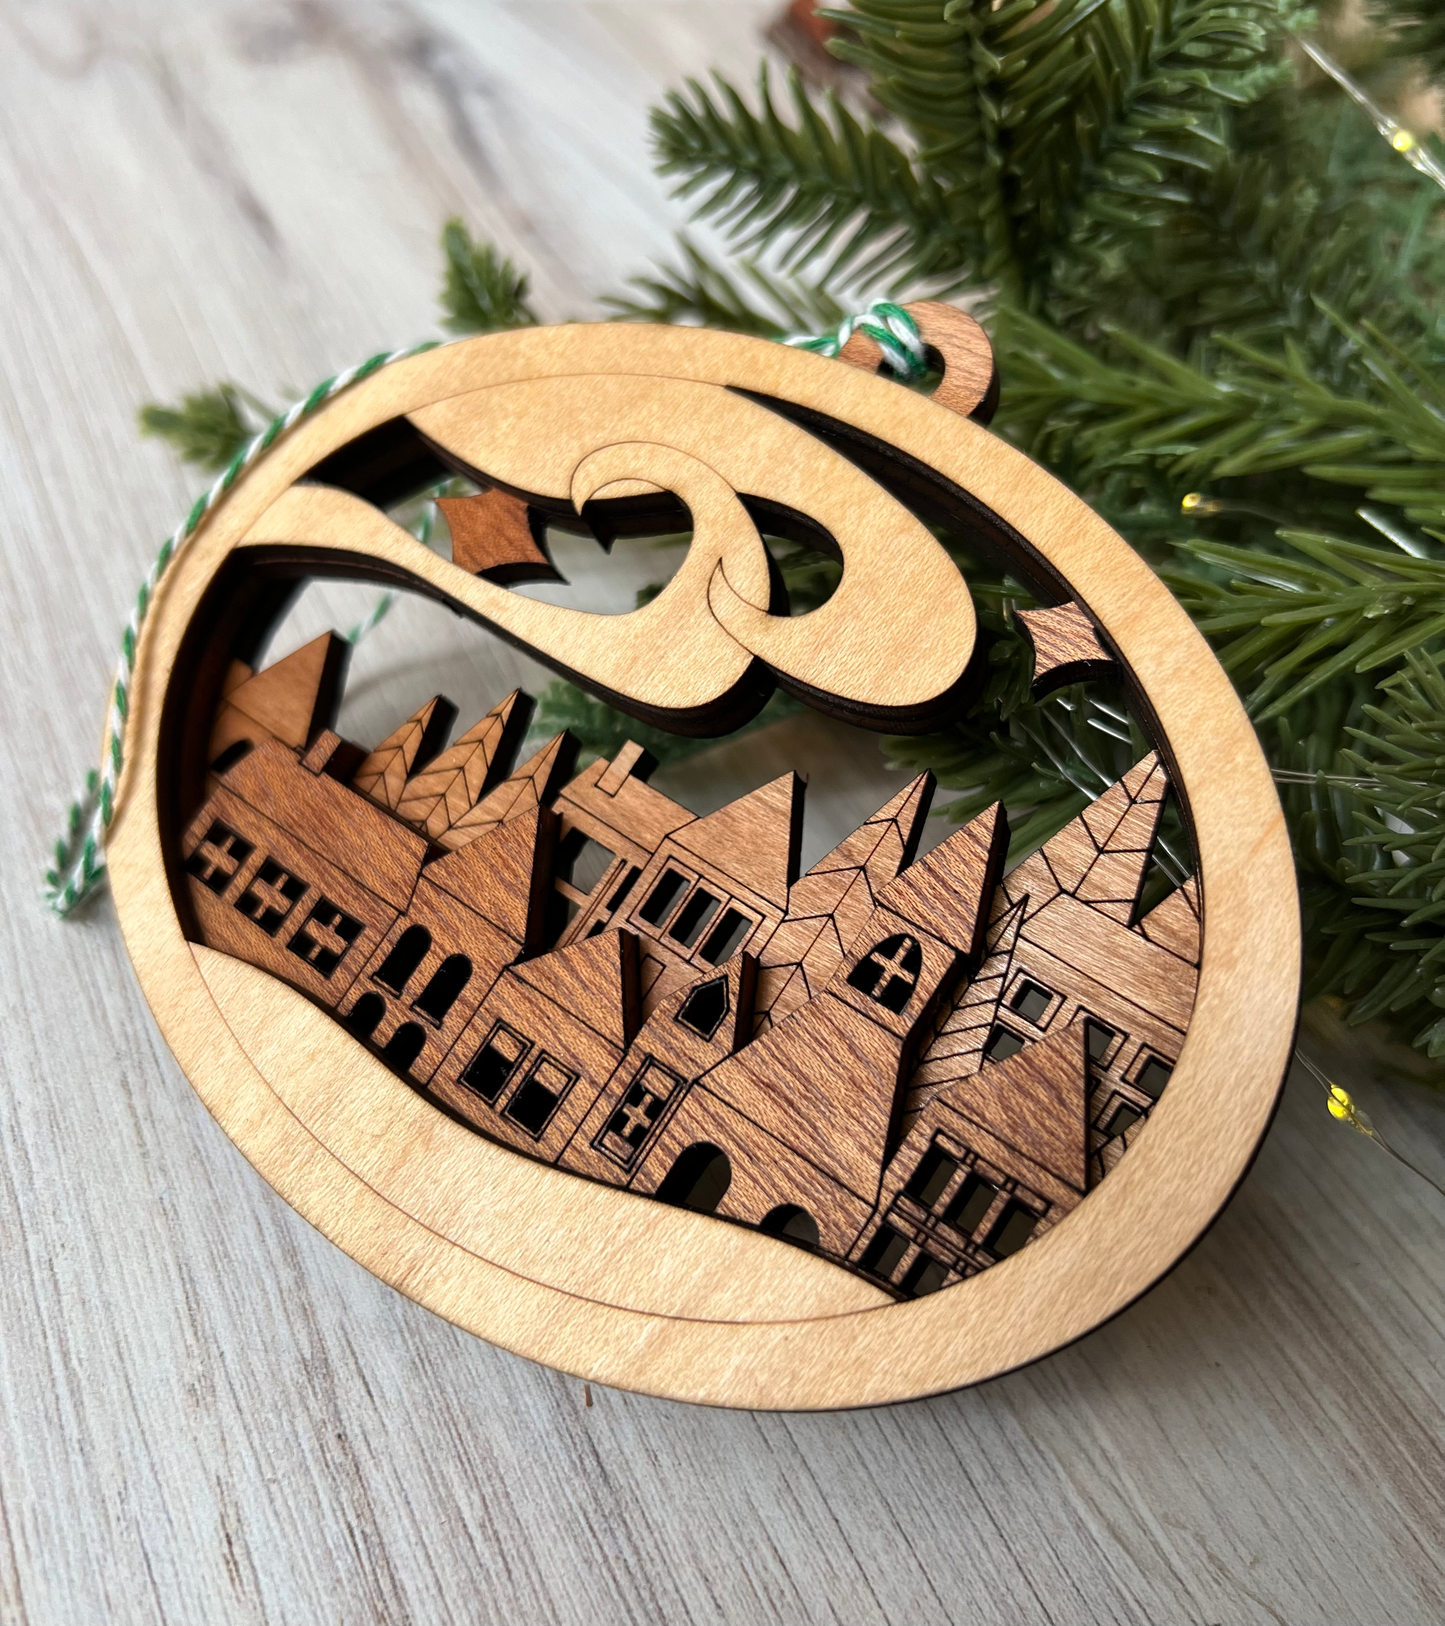 Village Themed Wooden Christmas Ornament / Christmas ornament / wooden ornament/ Christmas Village